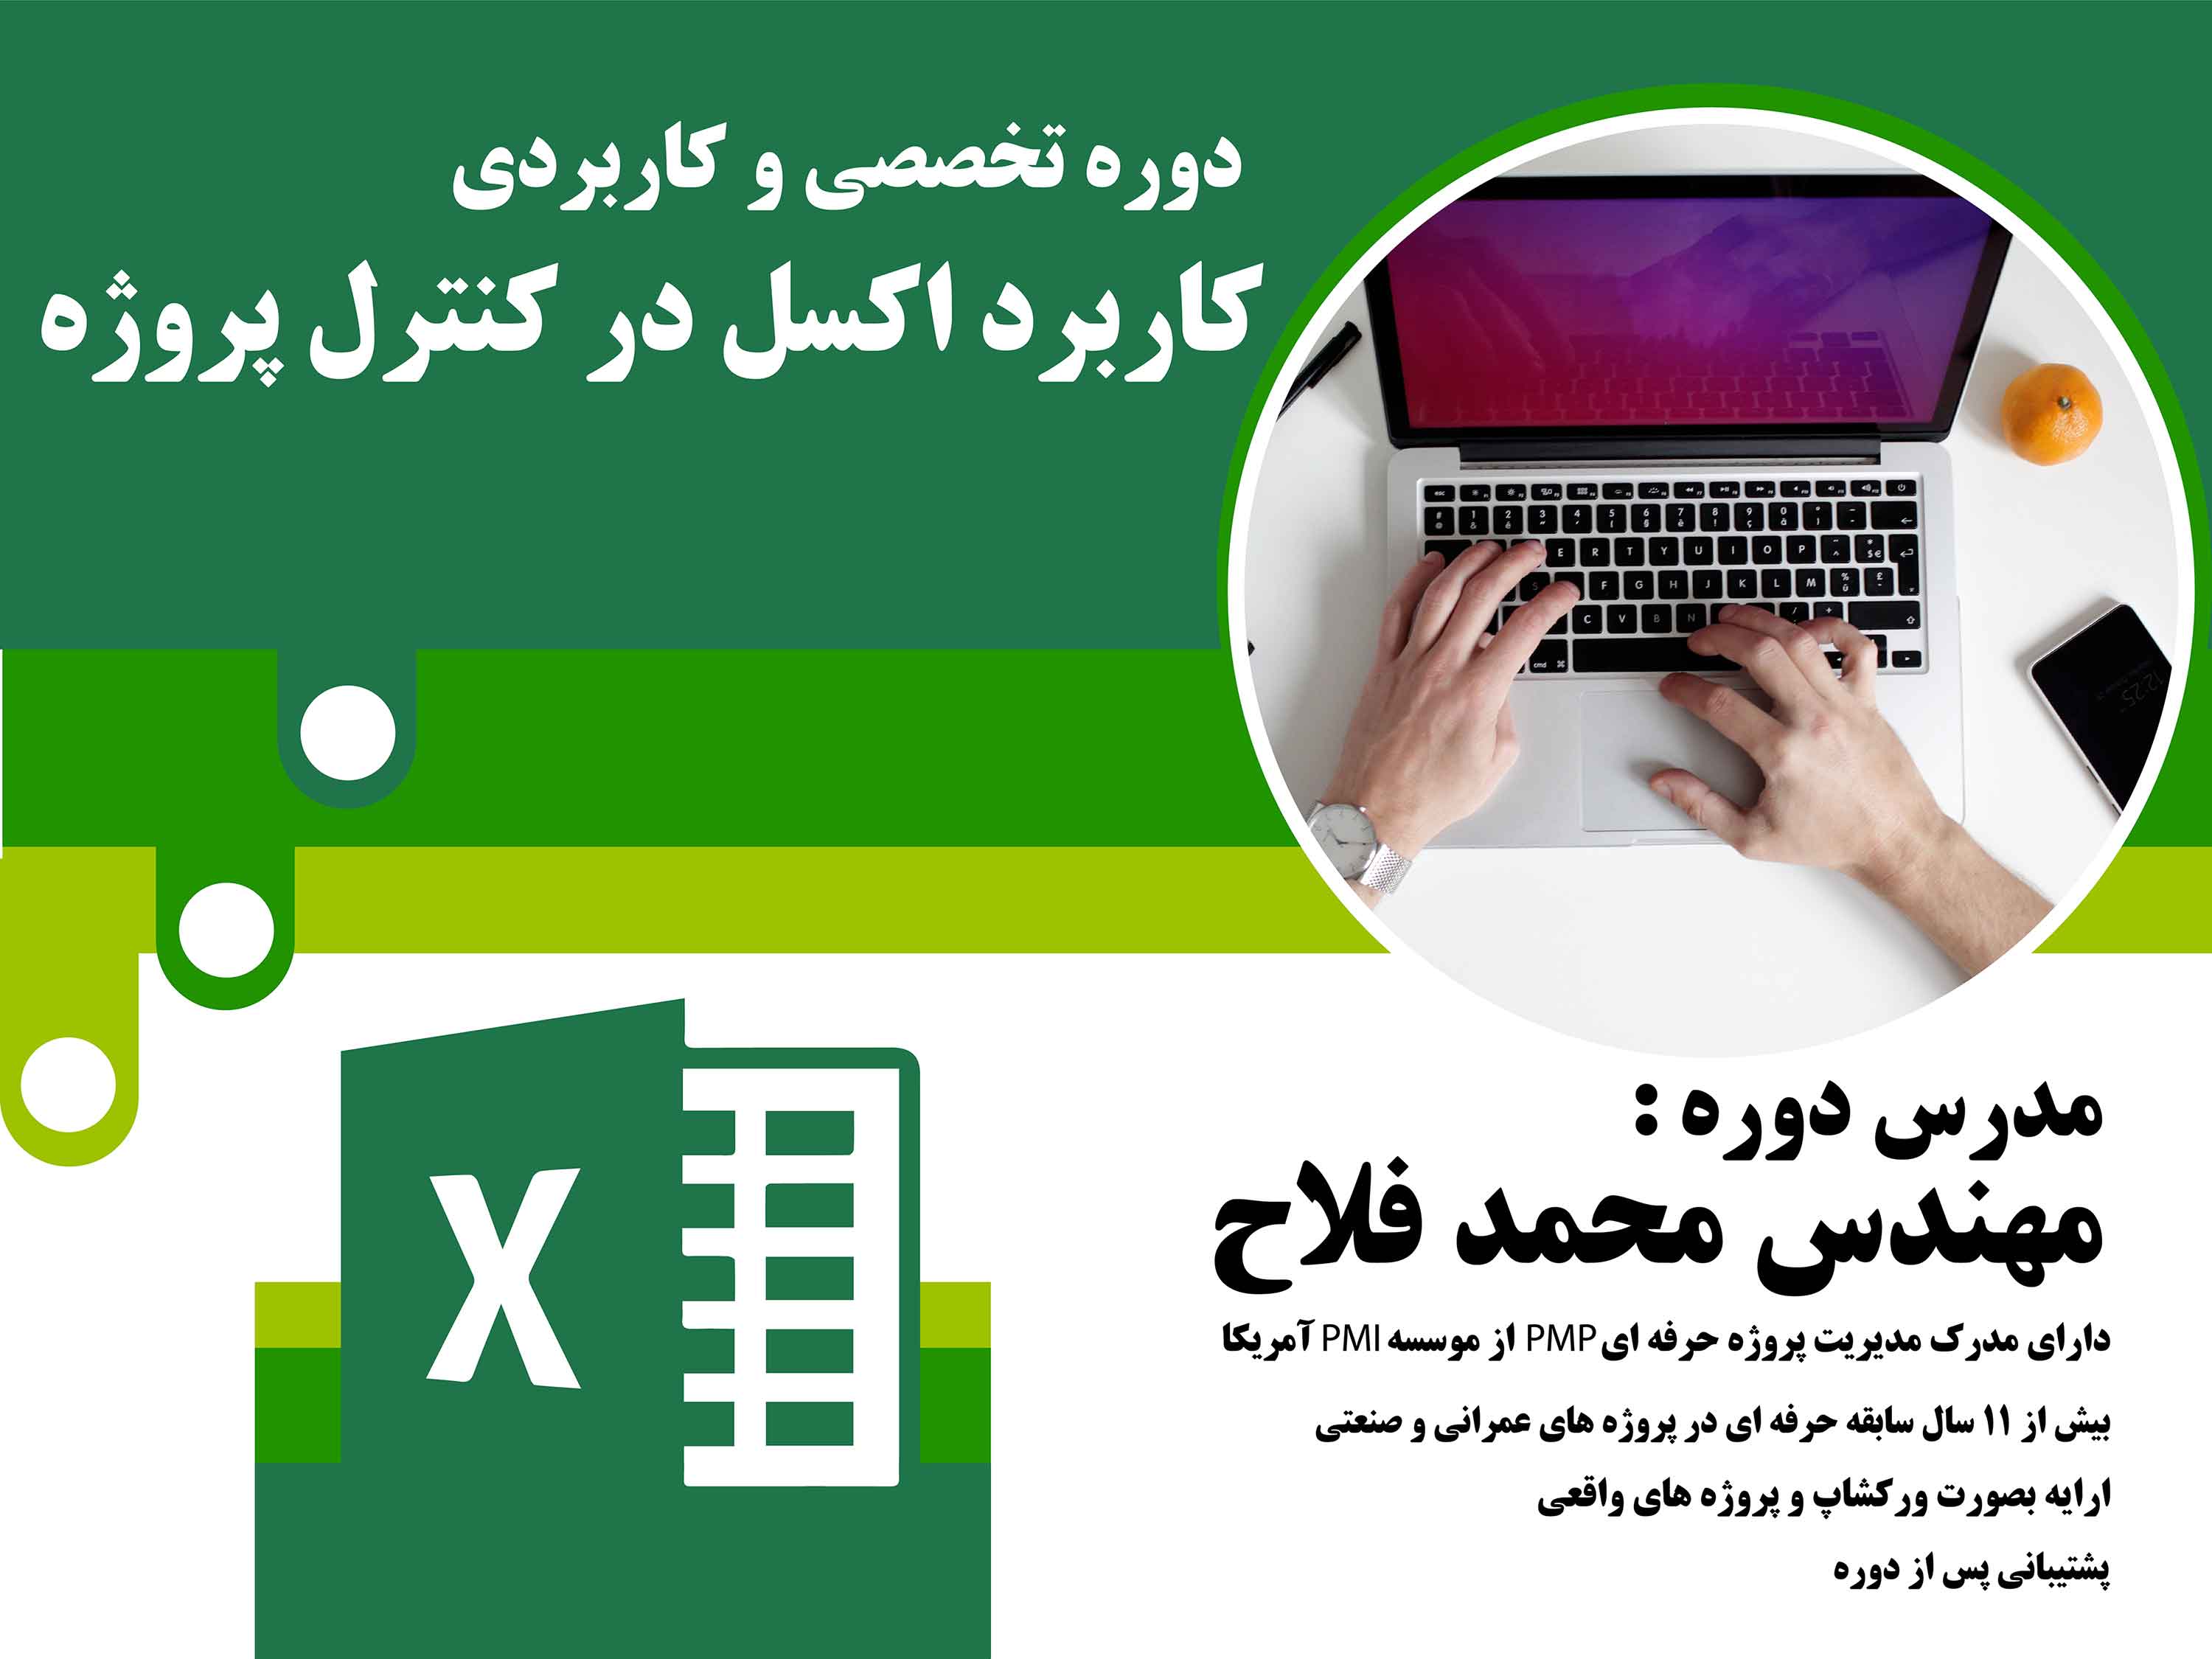 Application of Excel in Project Control